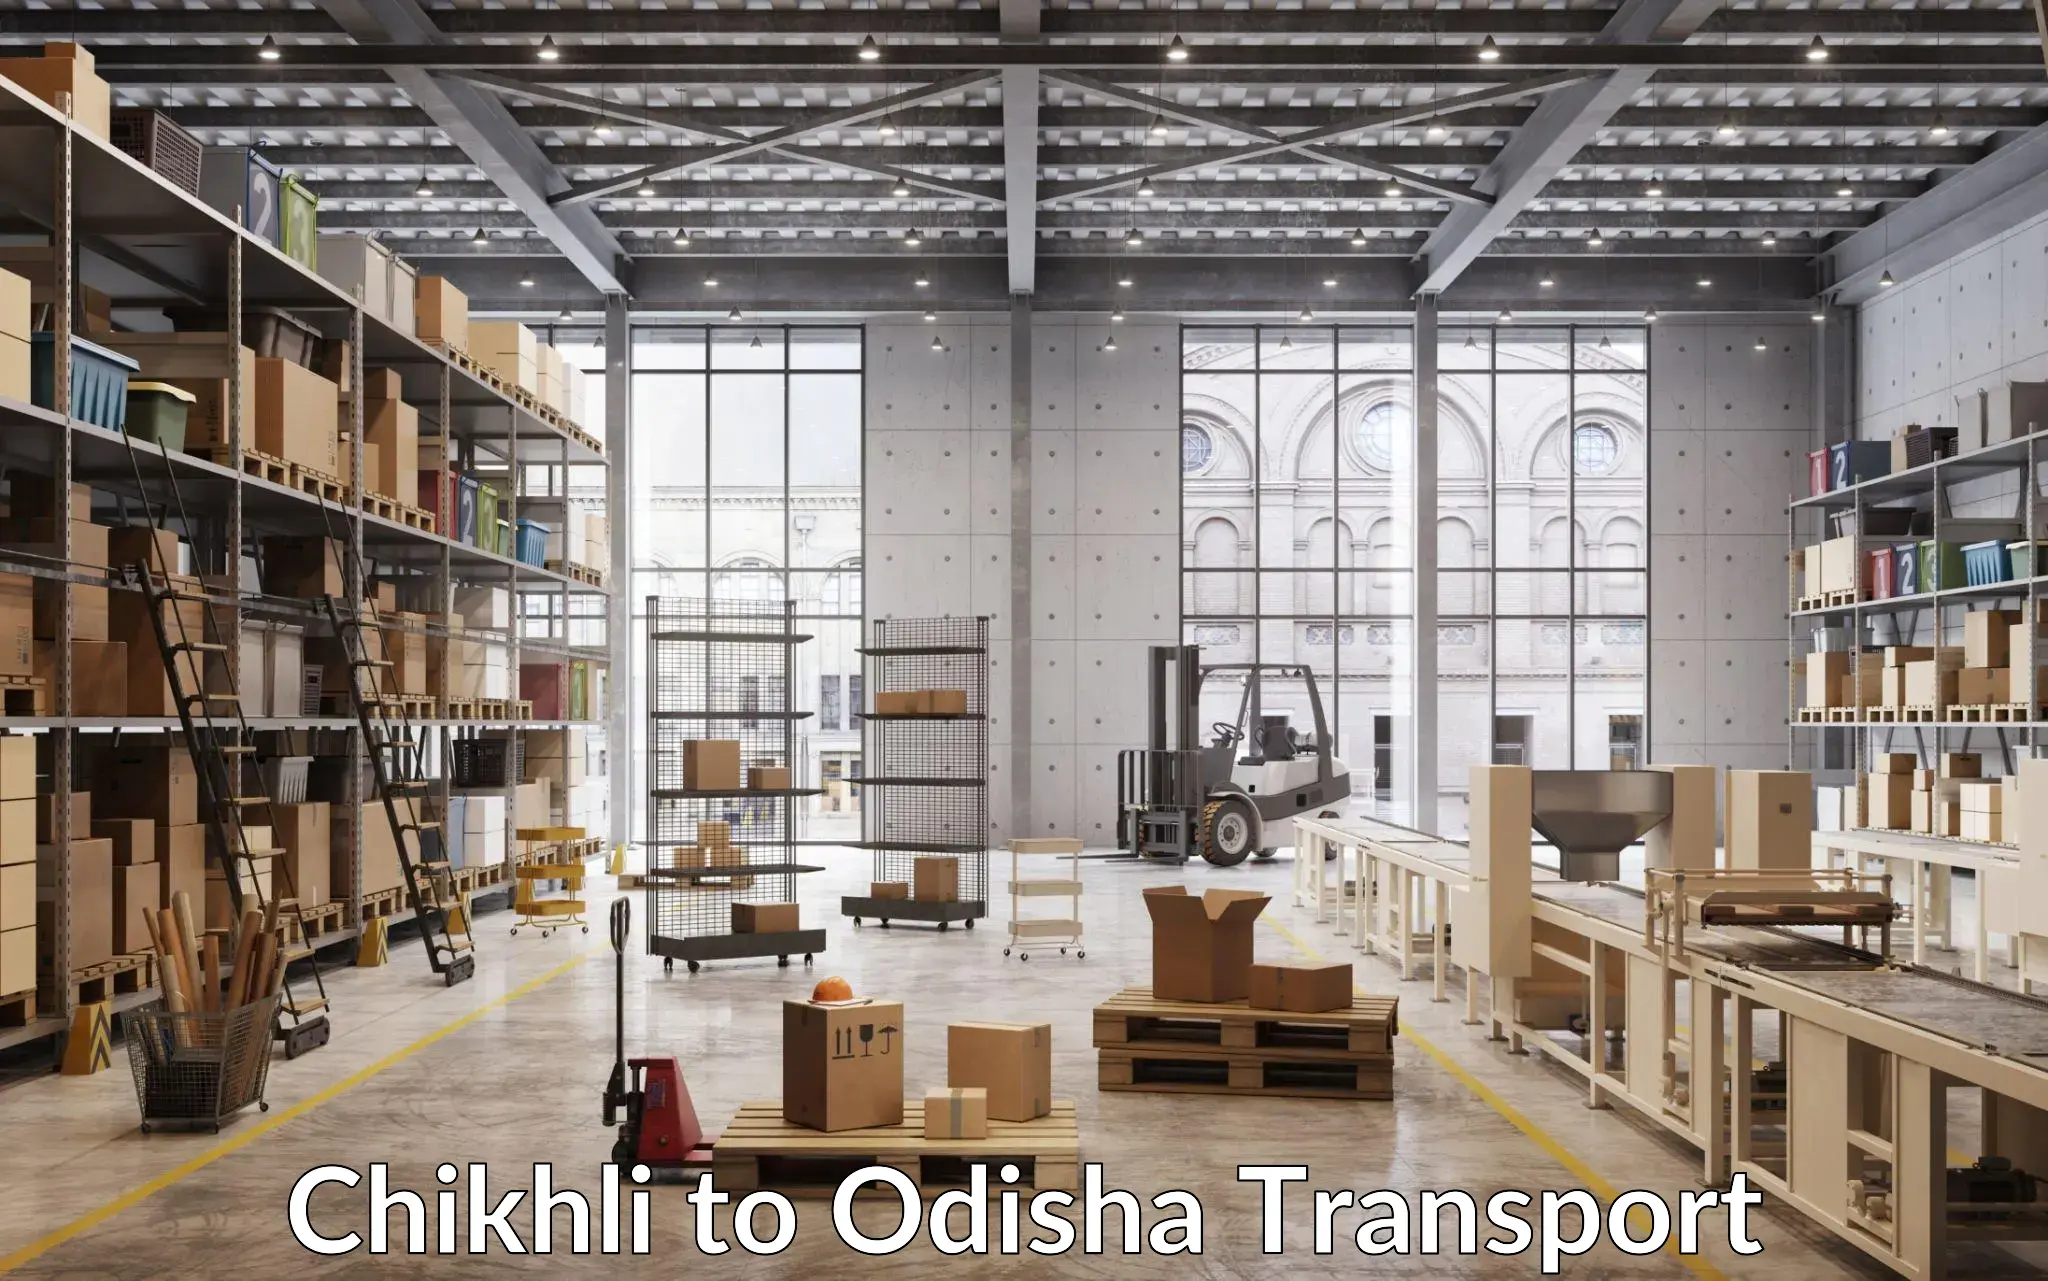 All India transport service Chikhli to Paradip Port